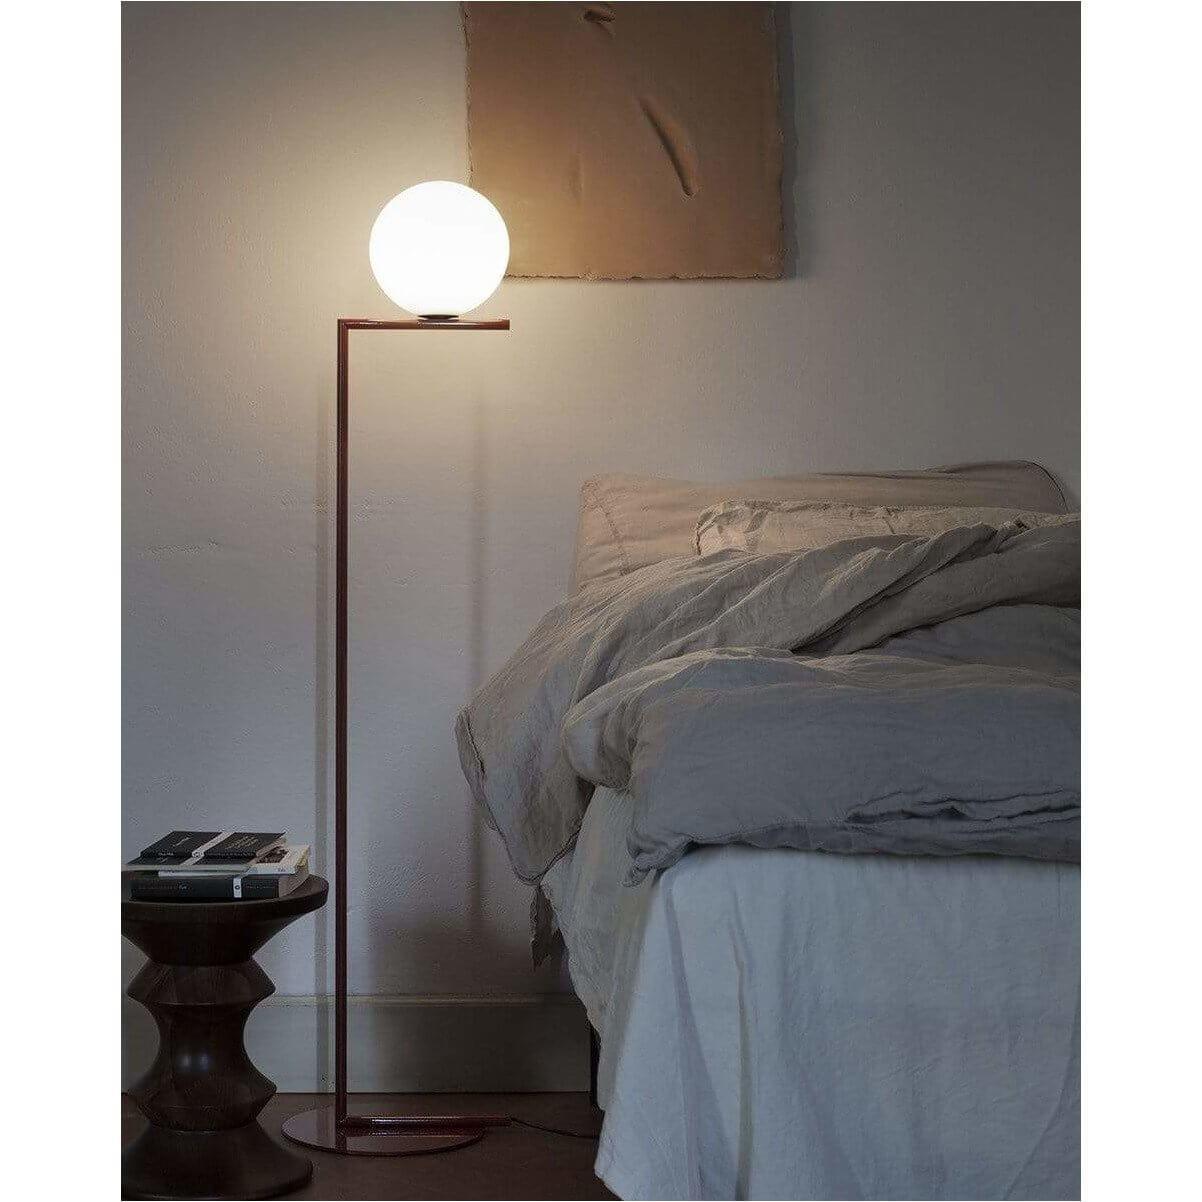 smag styrte årsag IC Lights Floor Dimmable Lamp by Flos exclusively through Curated